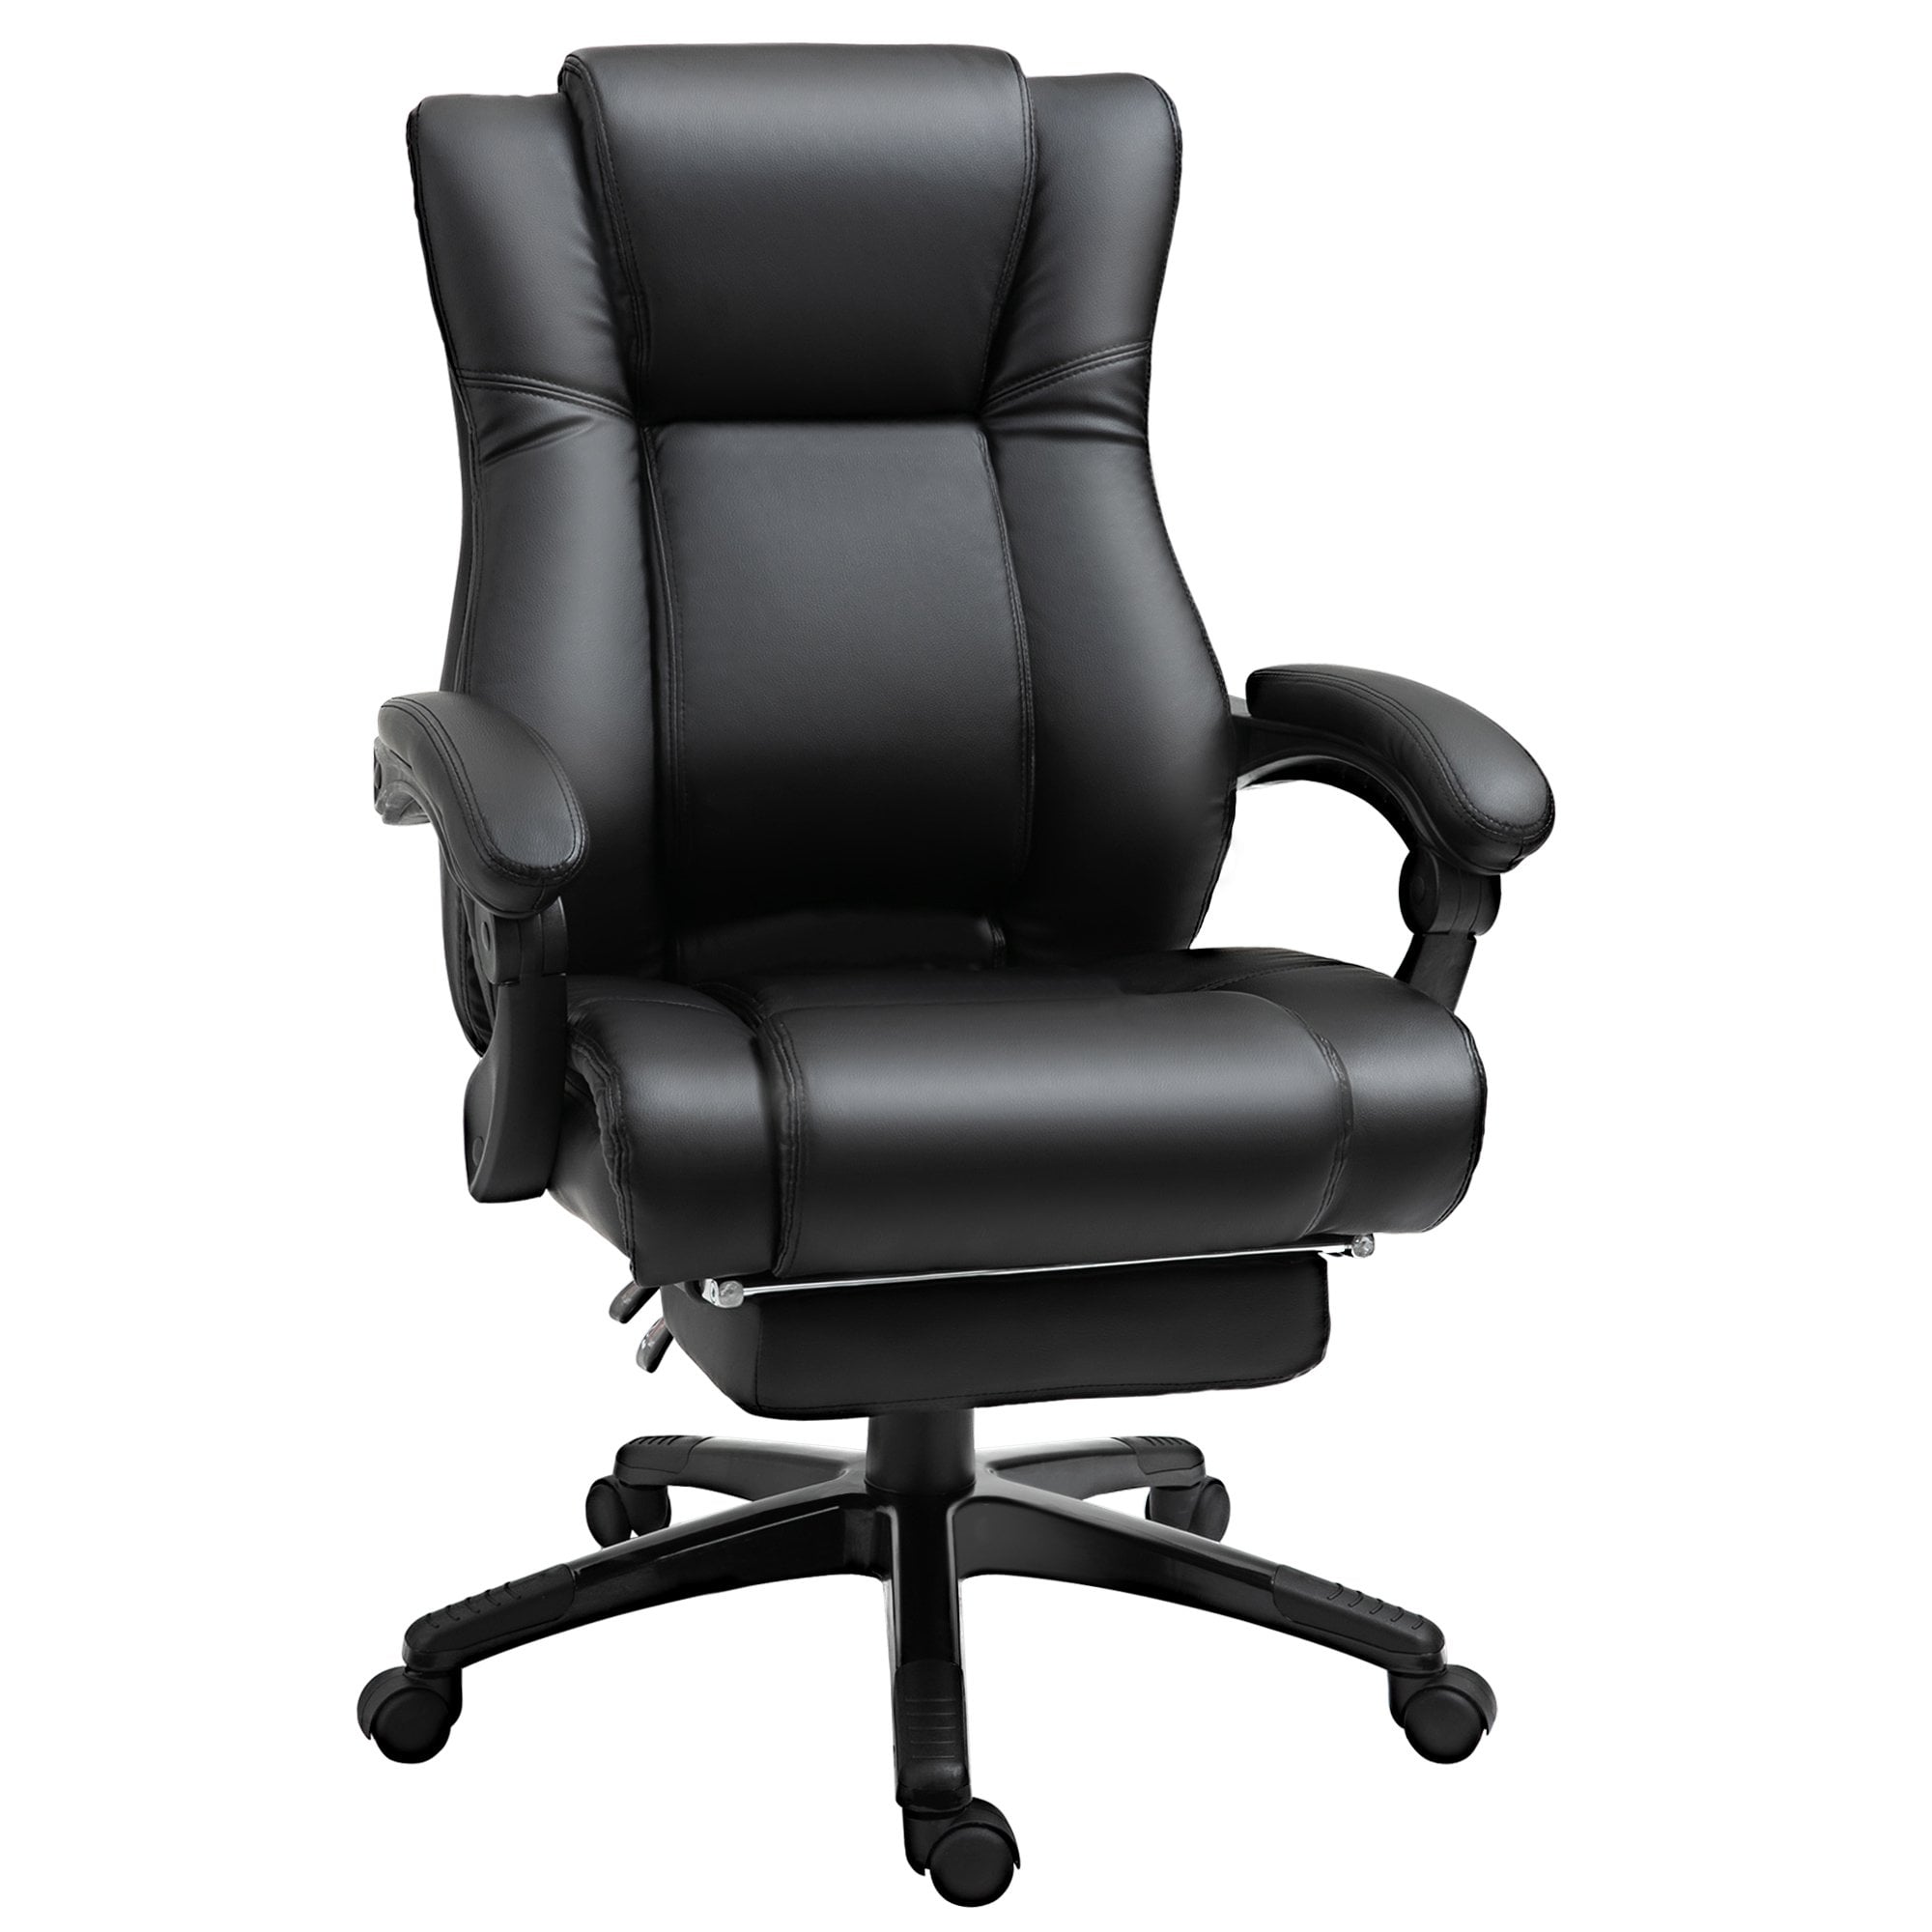 Vinsetto Executive Home Office Chair Swivel High Back Recliner PU Leather Ergonomic Chair - with Footrest - Wheels - Adjustable Height - Black Recline